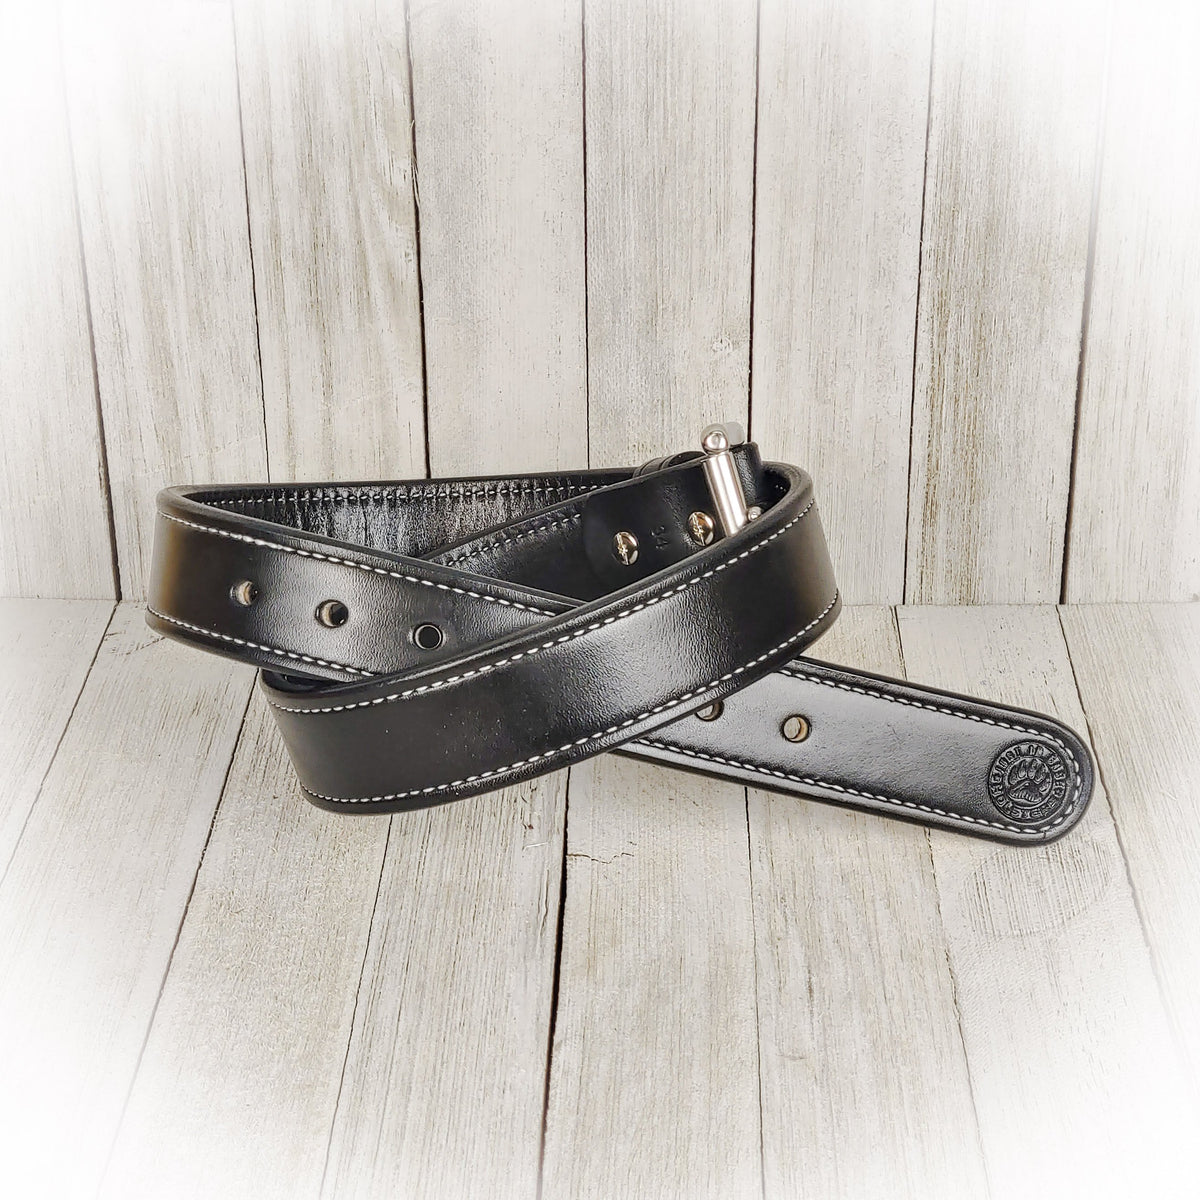 Double Thick Concealed Carry Belts (1.75" width)